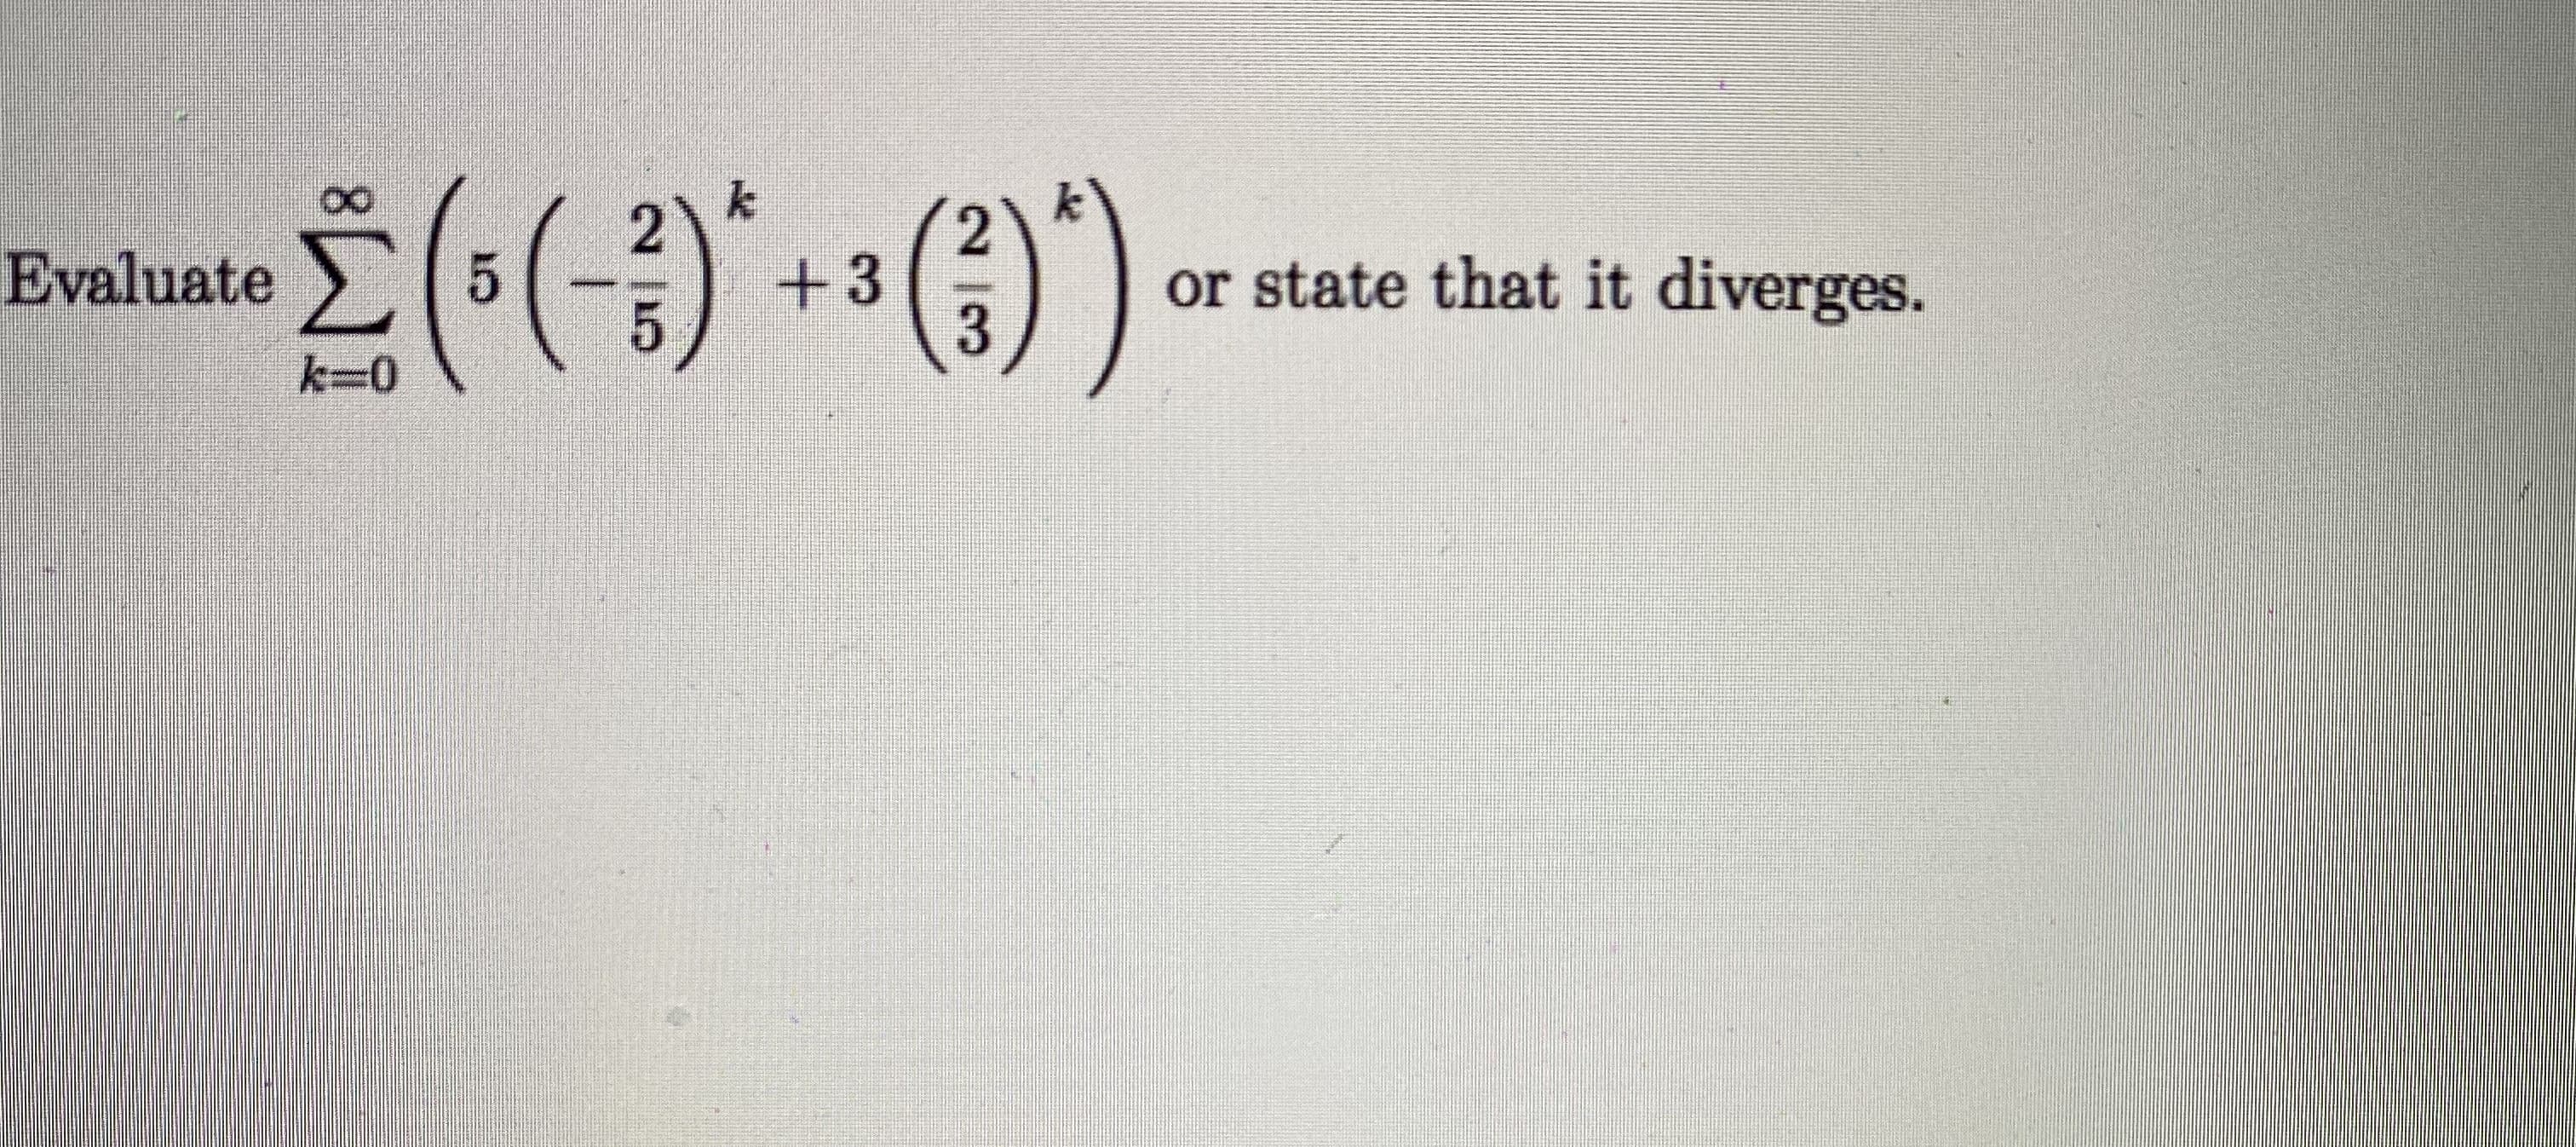 k
Evaluate
+3
or state that it diverges.
k30
